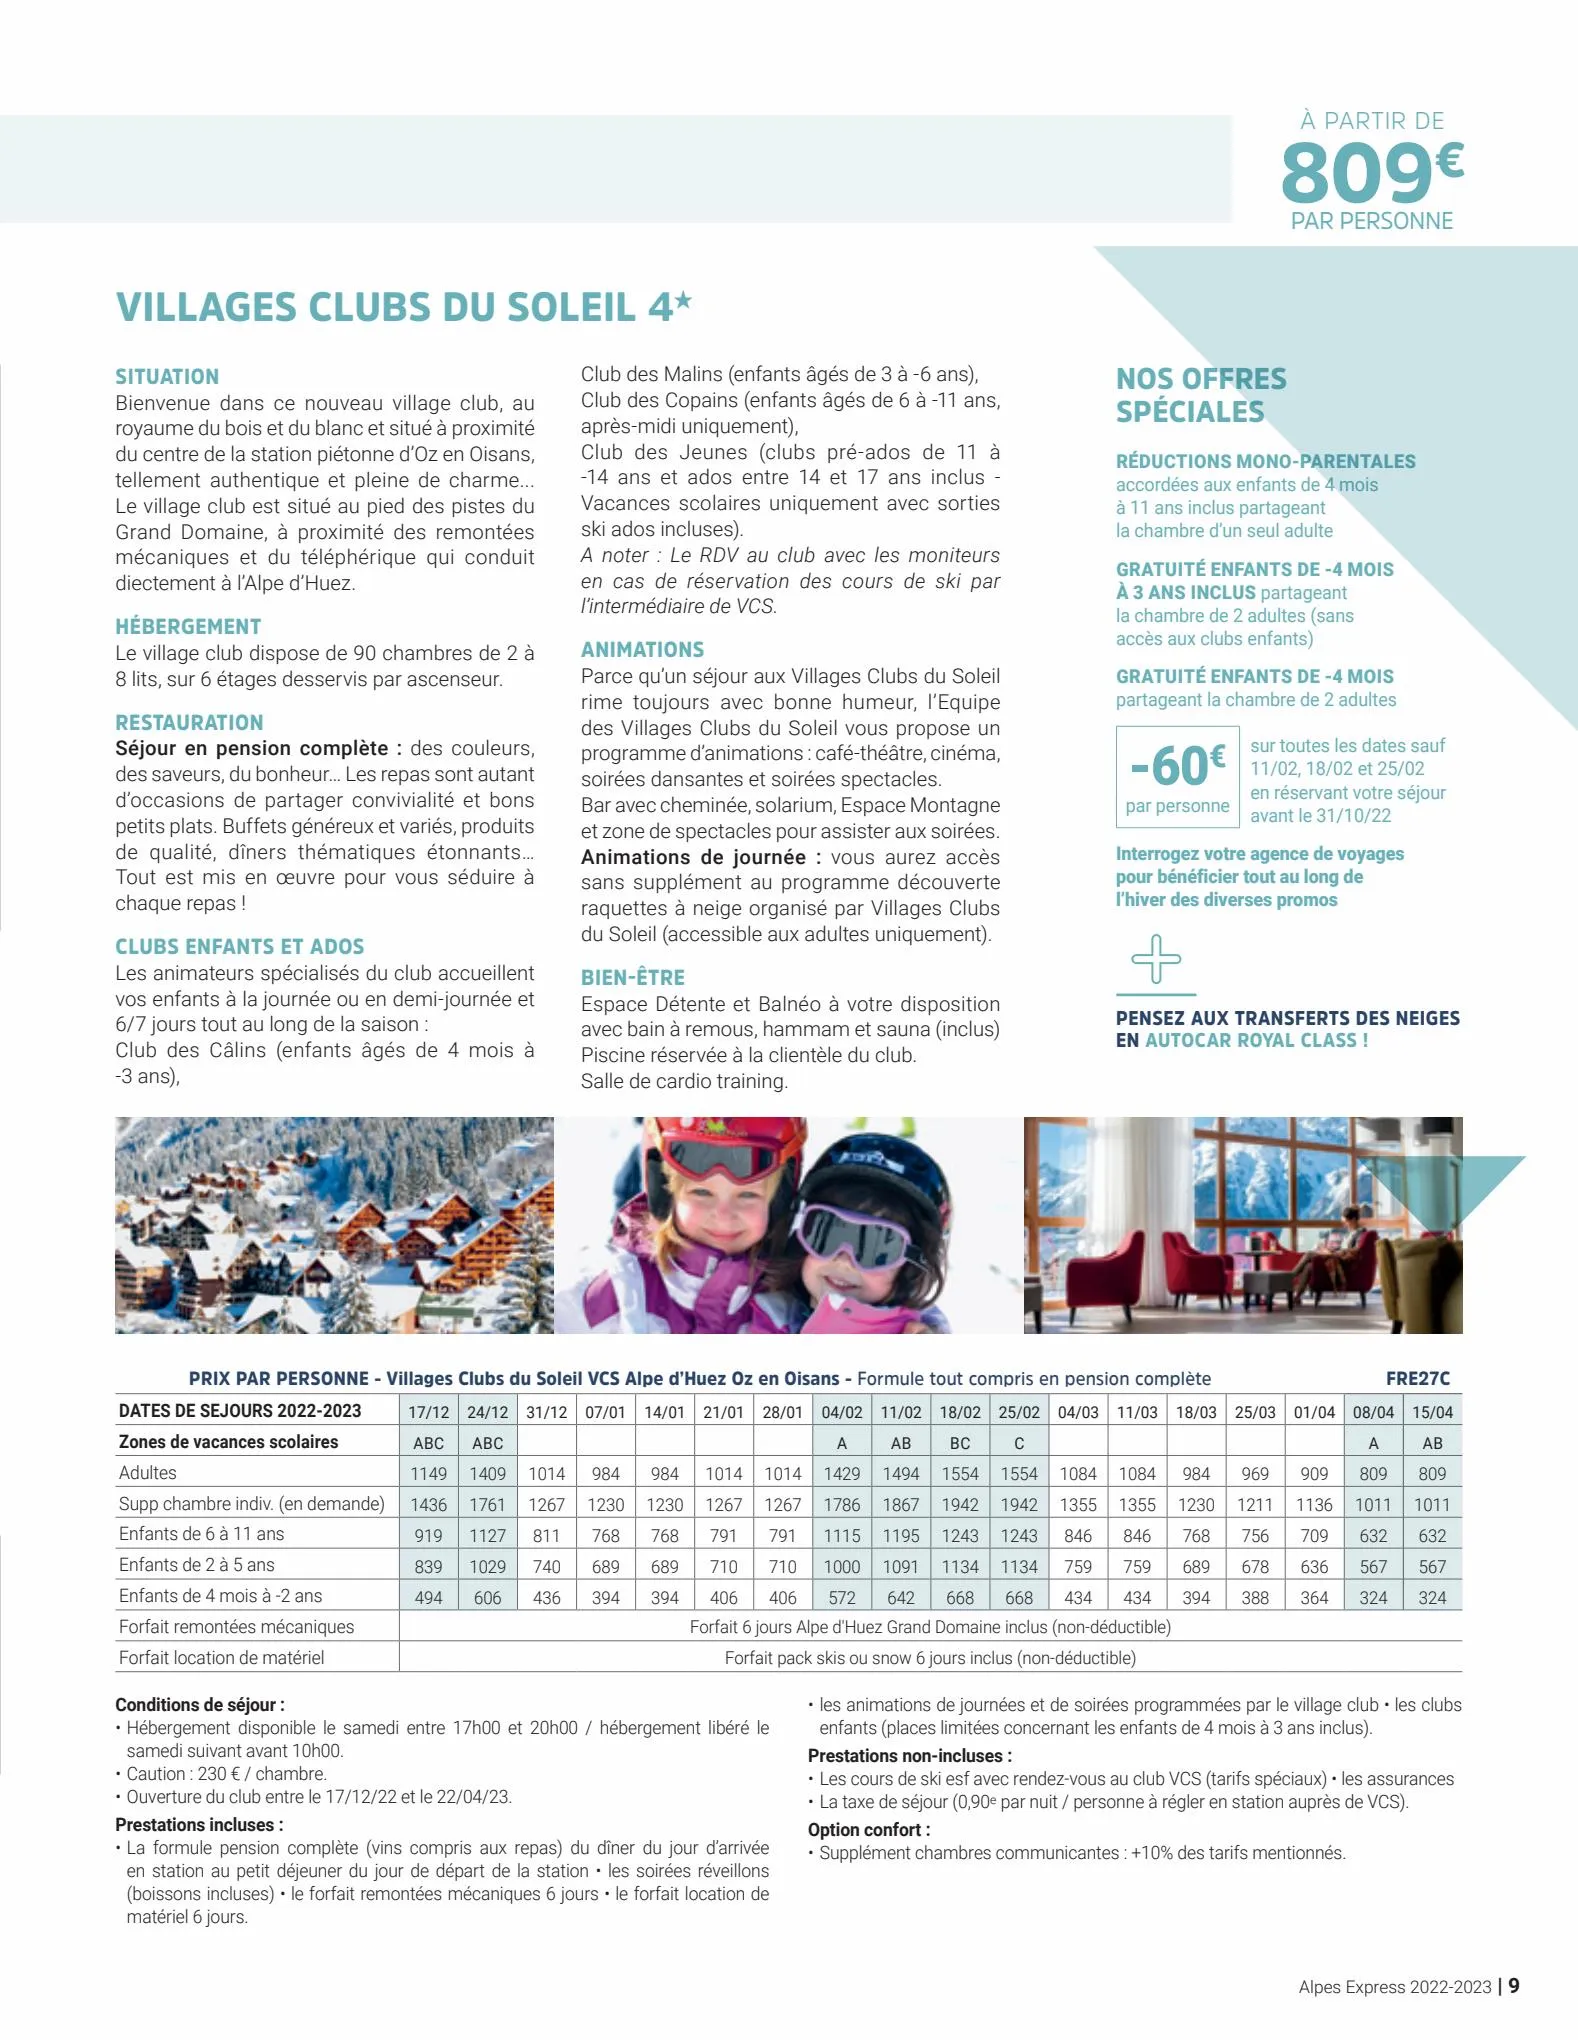 Catalogue Alpes Express - Hiver 2022-2023, page 00009